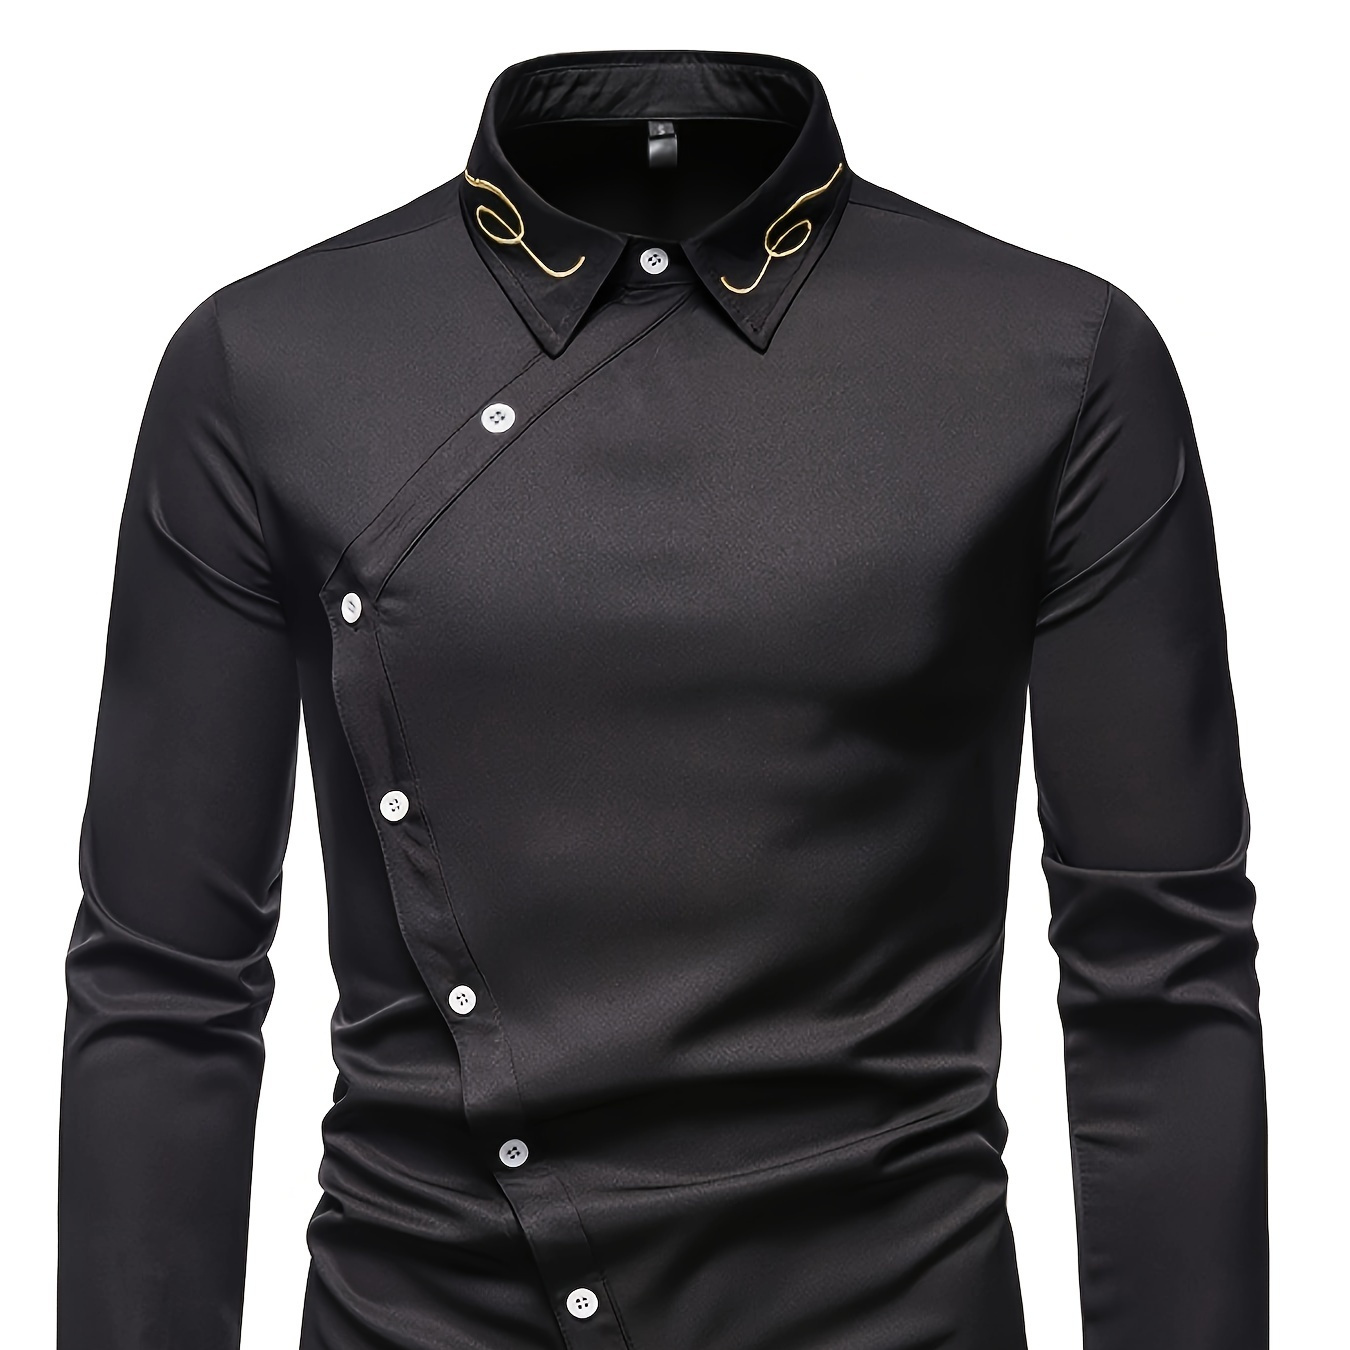 

Embroidery Design Men's Stylish Asymmetrical Slim Long Sleeve Single Breast Shirt With Button, Banquet Wedding